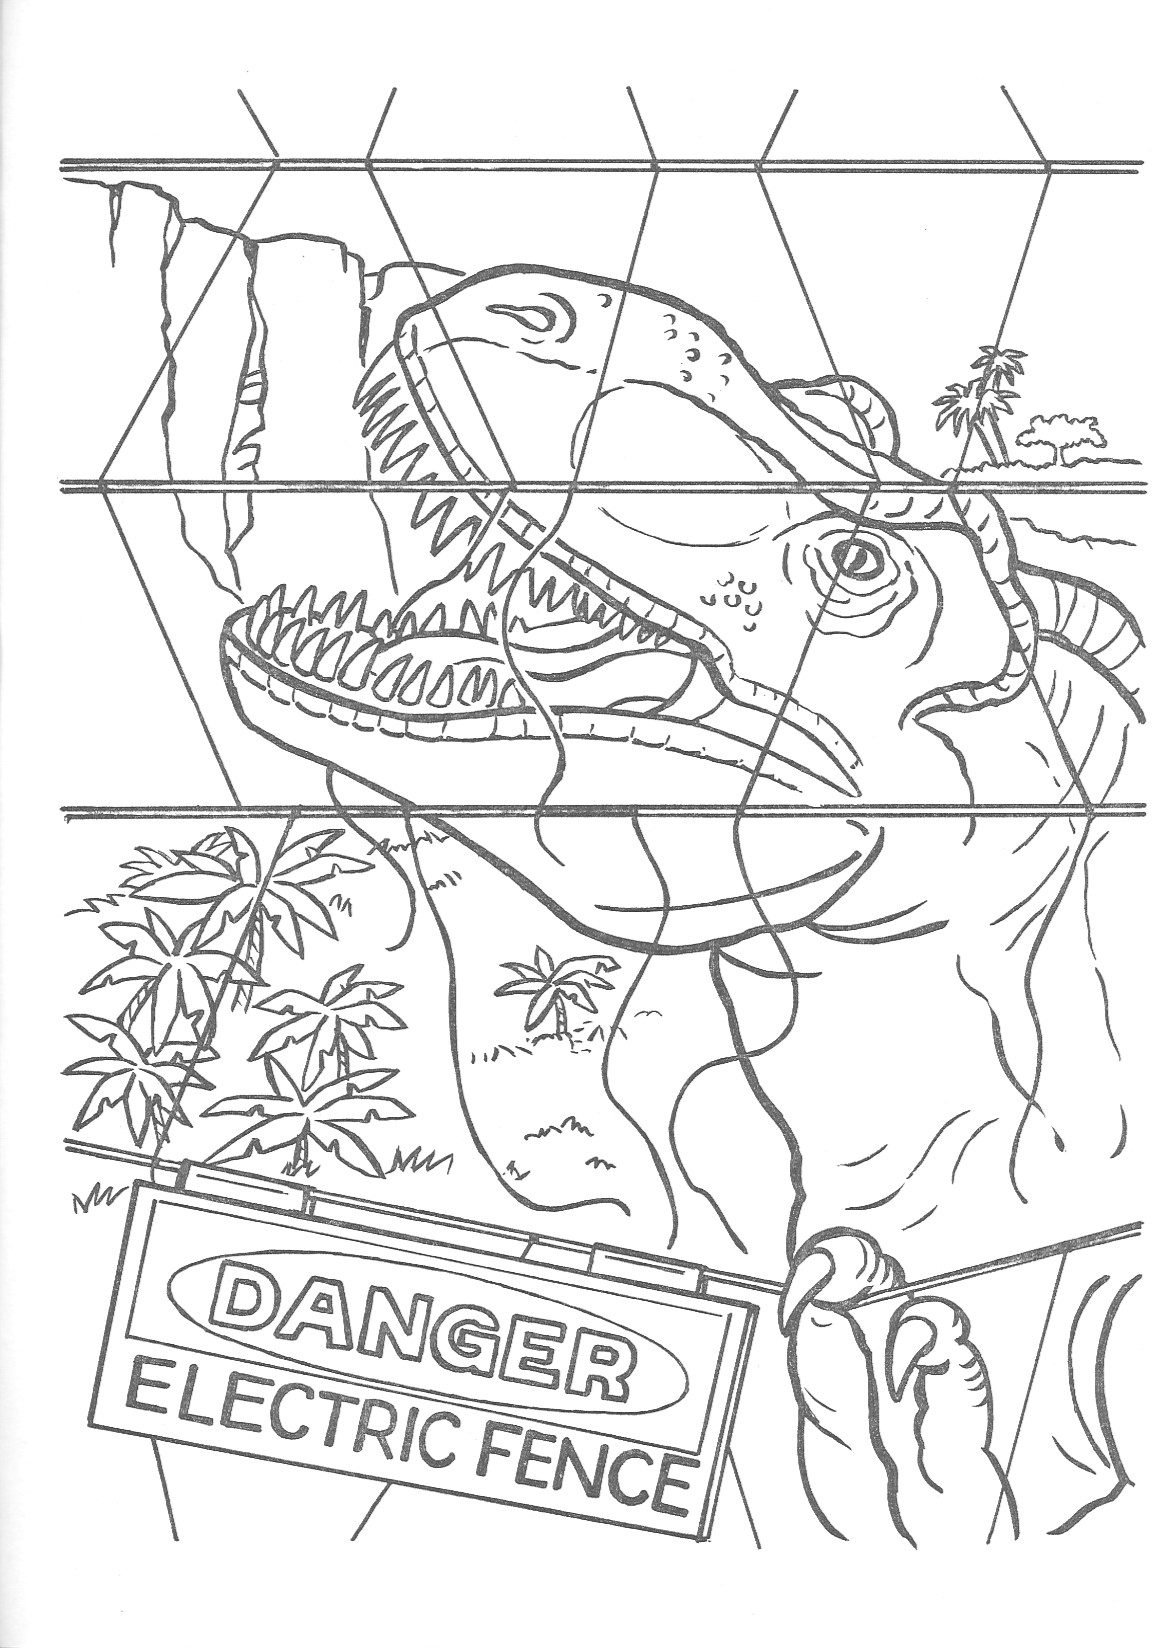 Jurassic Park official coloring page - Jurassic Park Photo (43330811